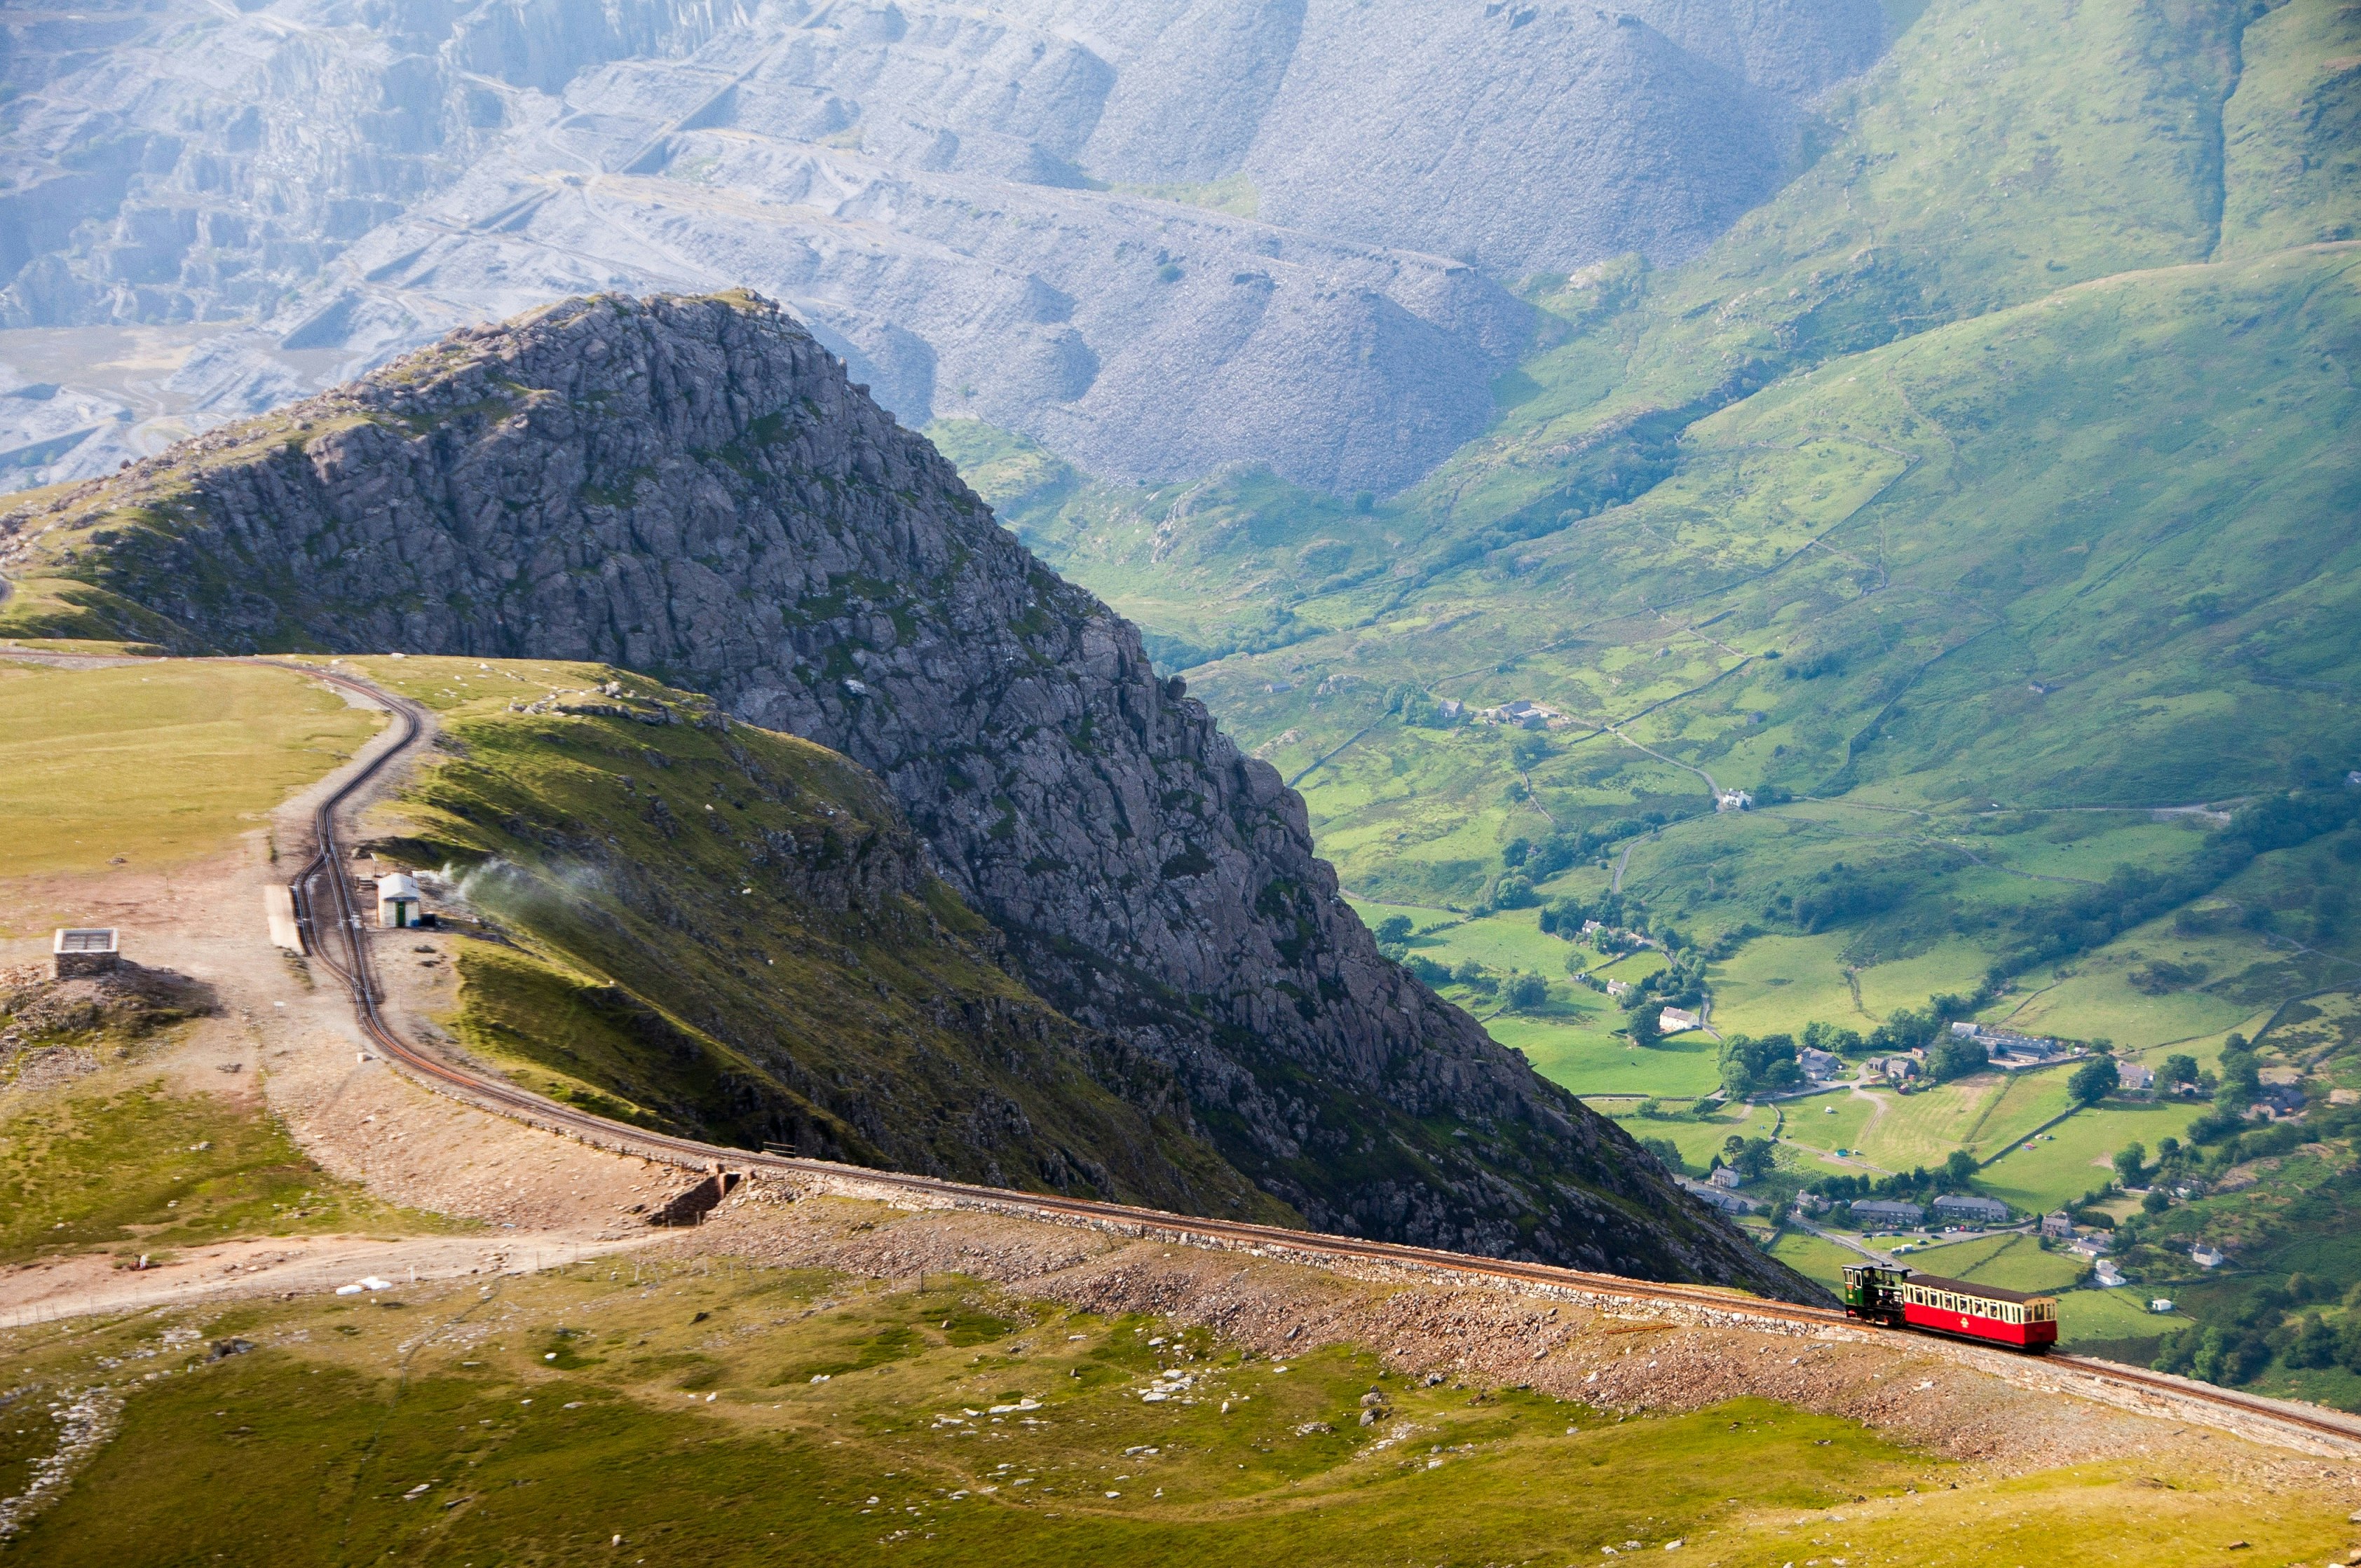 The Snowdon Mountain Railway running along the tracks on its way to the summit of Snowdon. The carriage is red, which stands out against the green hillsides. In the background, a small village is visible at the mountain's base.